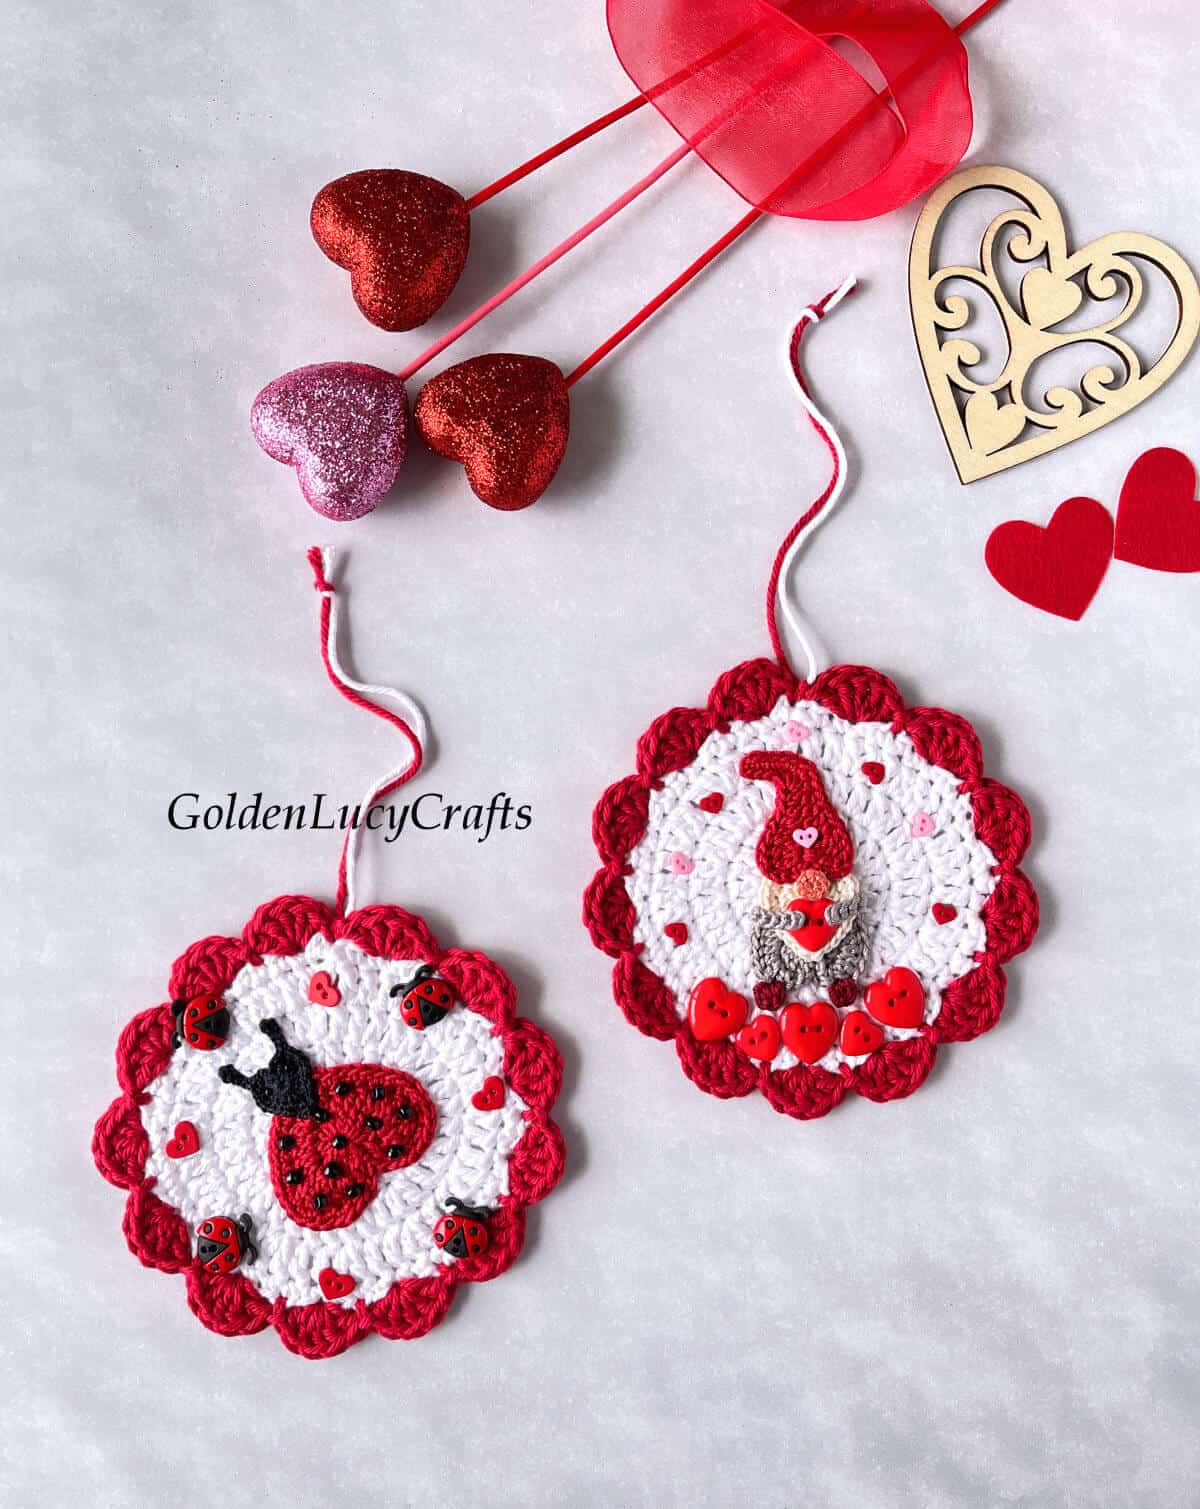 Looking for free valentines crochet patterns? You're in the right place, check out 23 fun and free valentines crochet patterns!